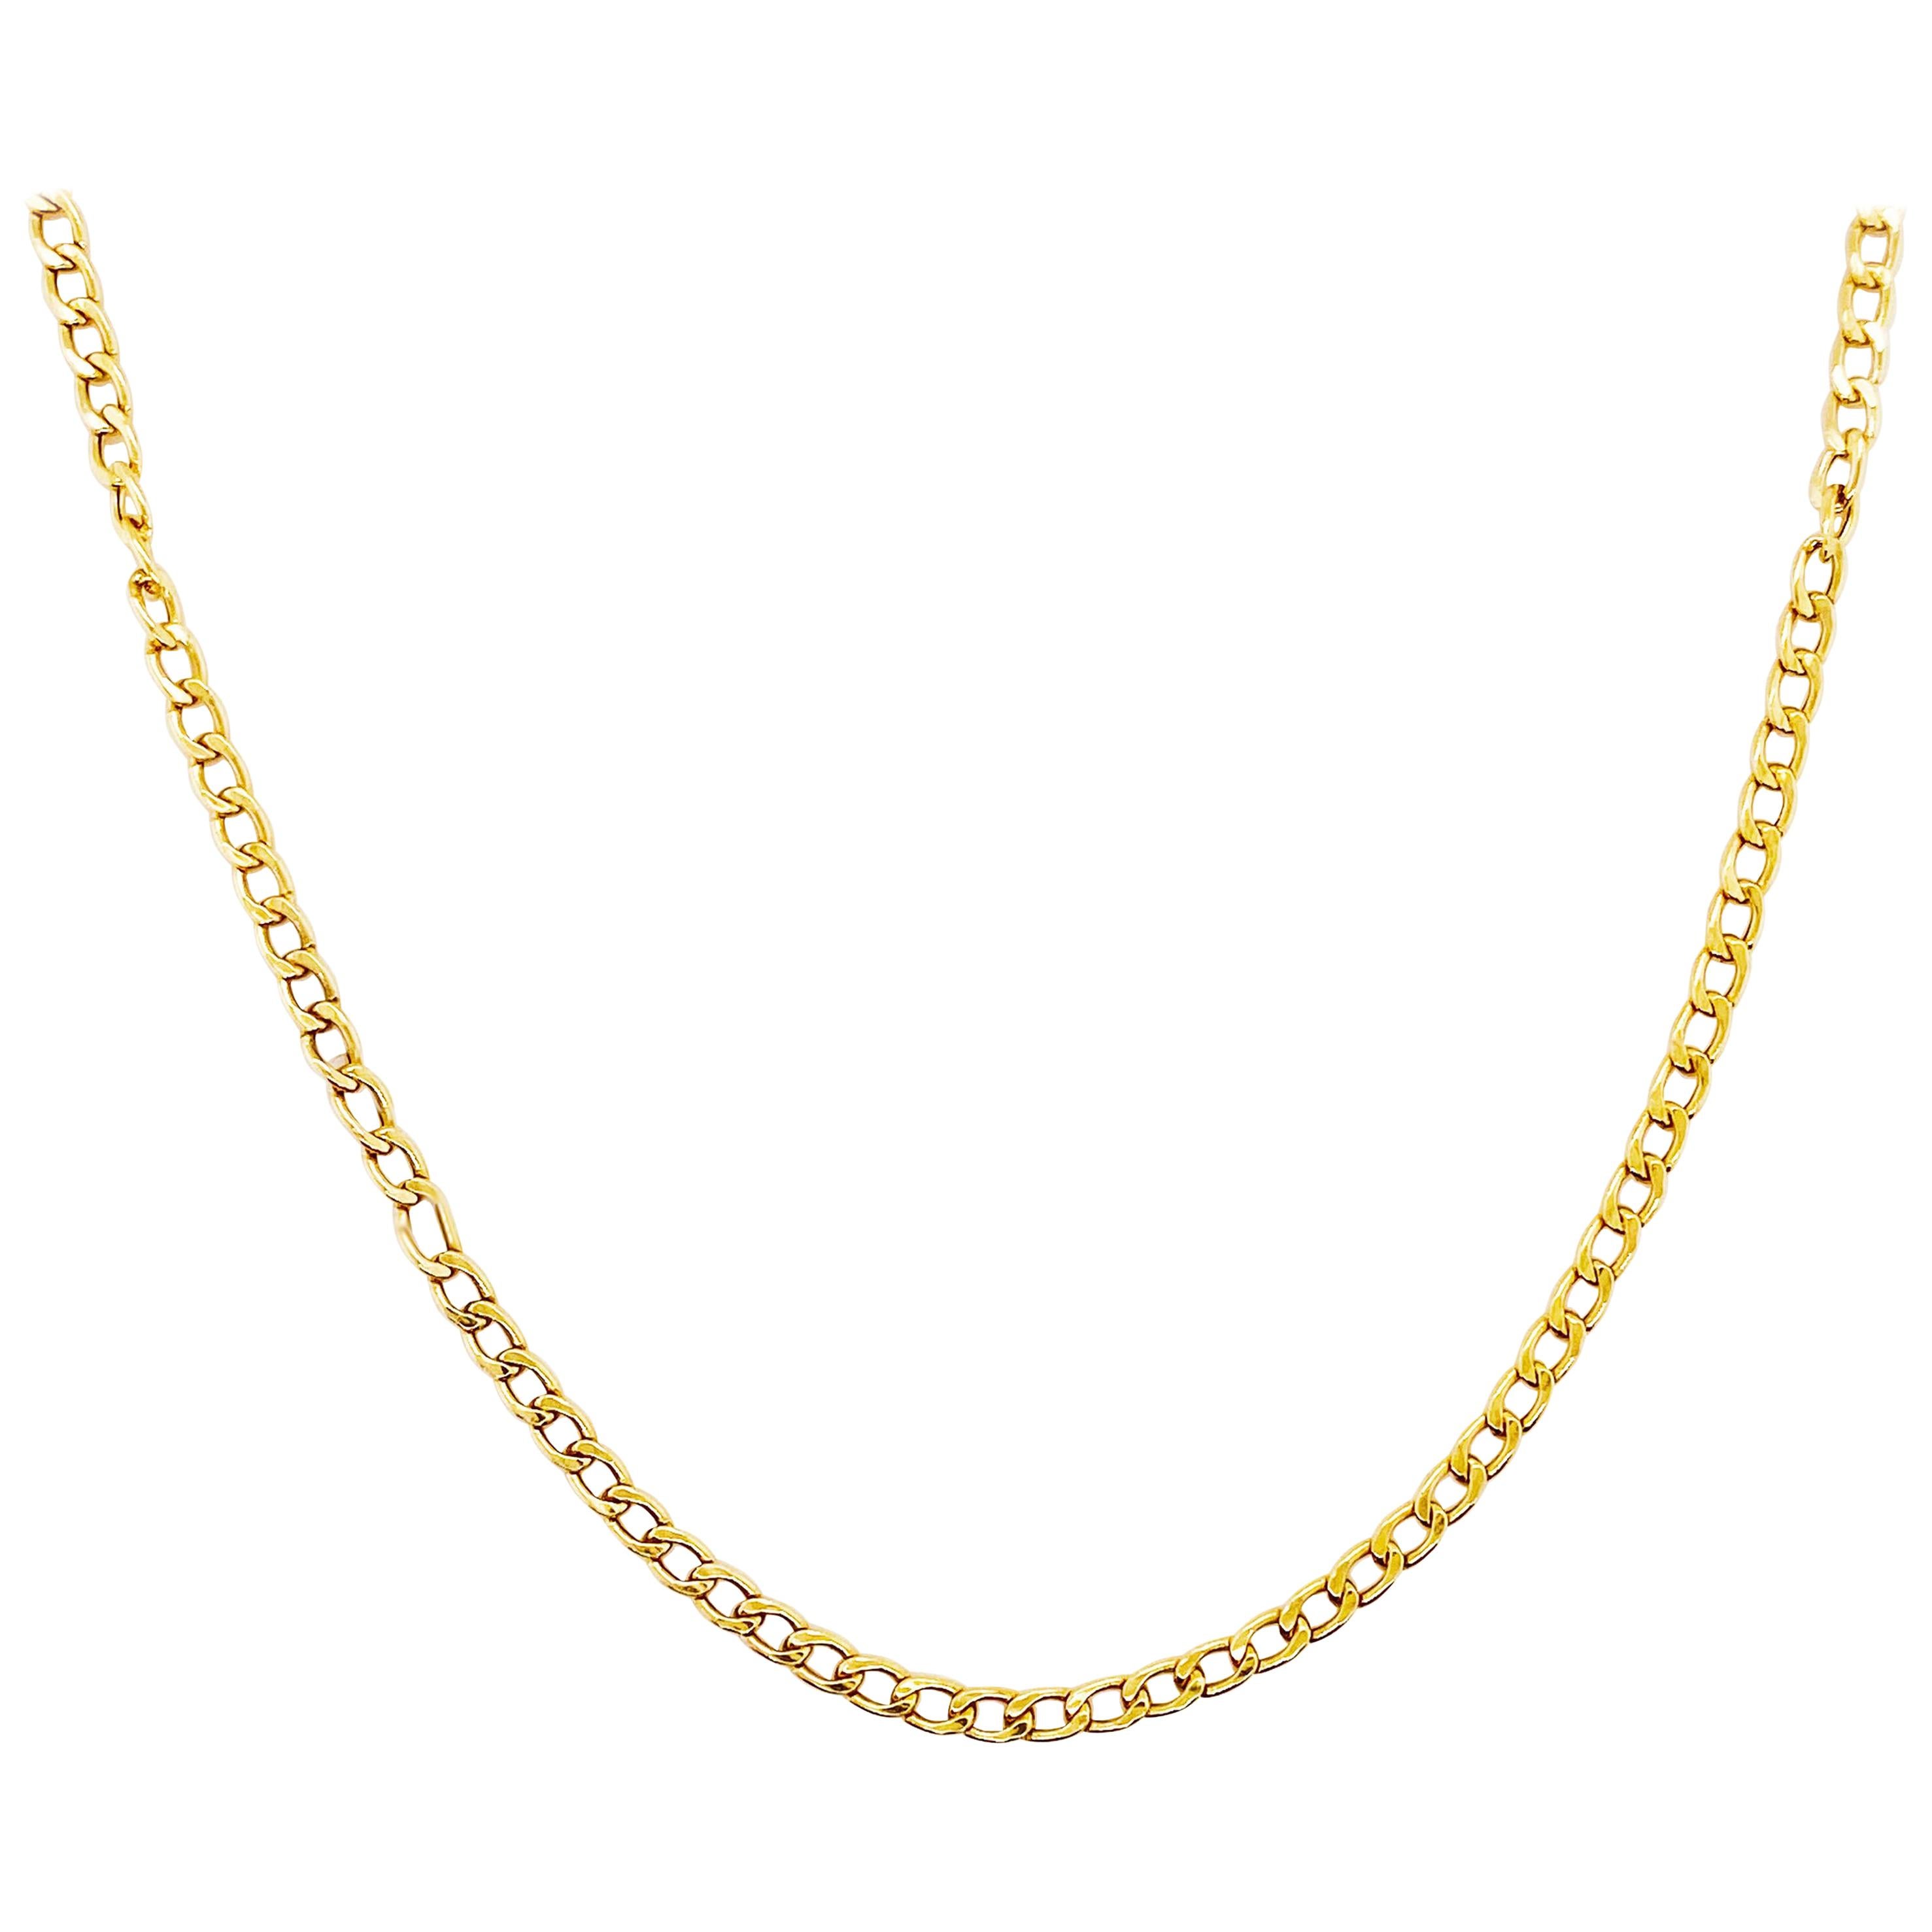 Large Cable Chain Long 14 Karat Yellow Gold, Long Necklace Chain 22inch 3.25mm For Sale